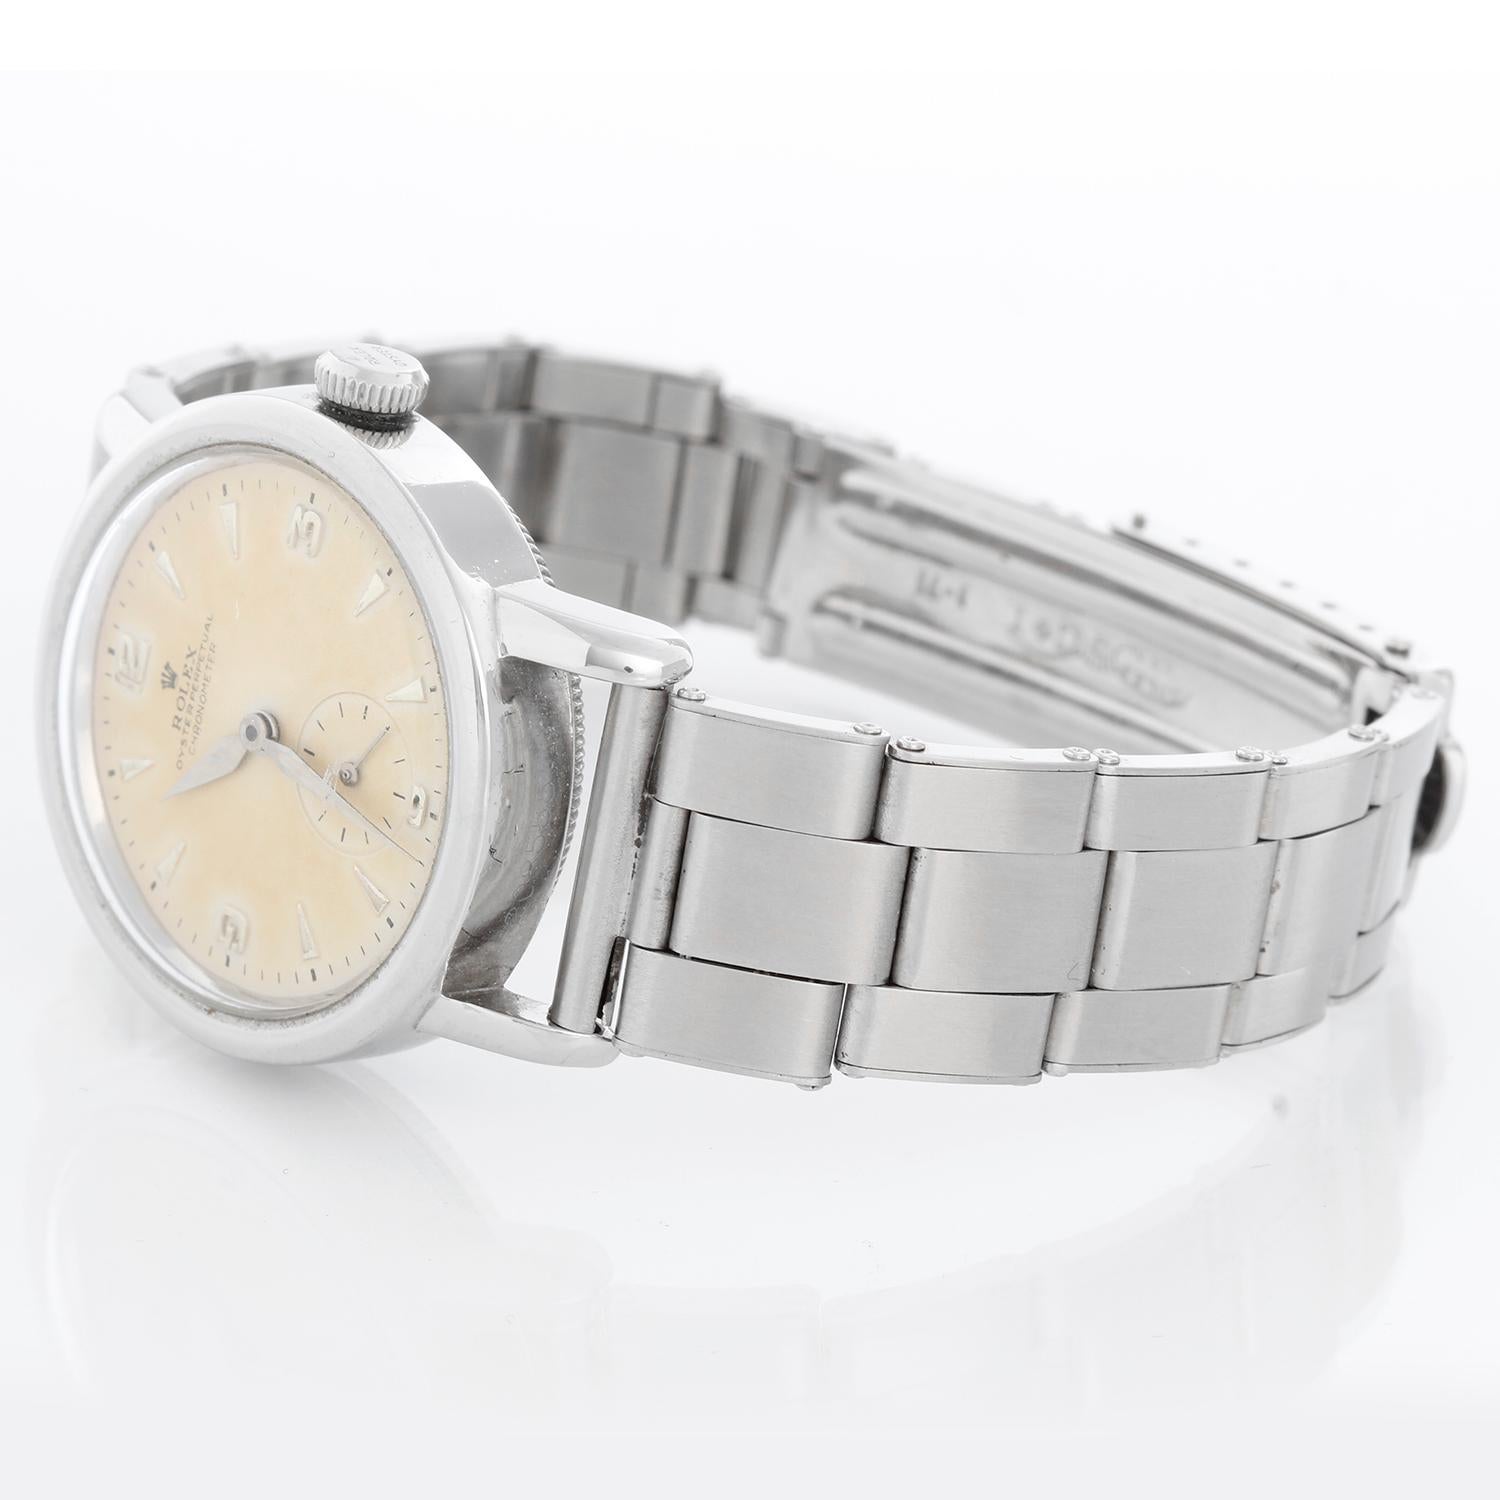 Vintage Rolex Oyster Perpetual Bubble Back Men's Ref. 3716 - Automatic winding. Polished stainless steel case (32 mm). White Arabic and raised numeral hour markers ; subseconds and chrome hands. Stainless steel bracelet. Pre-owned with custom box.